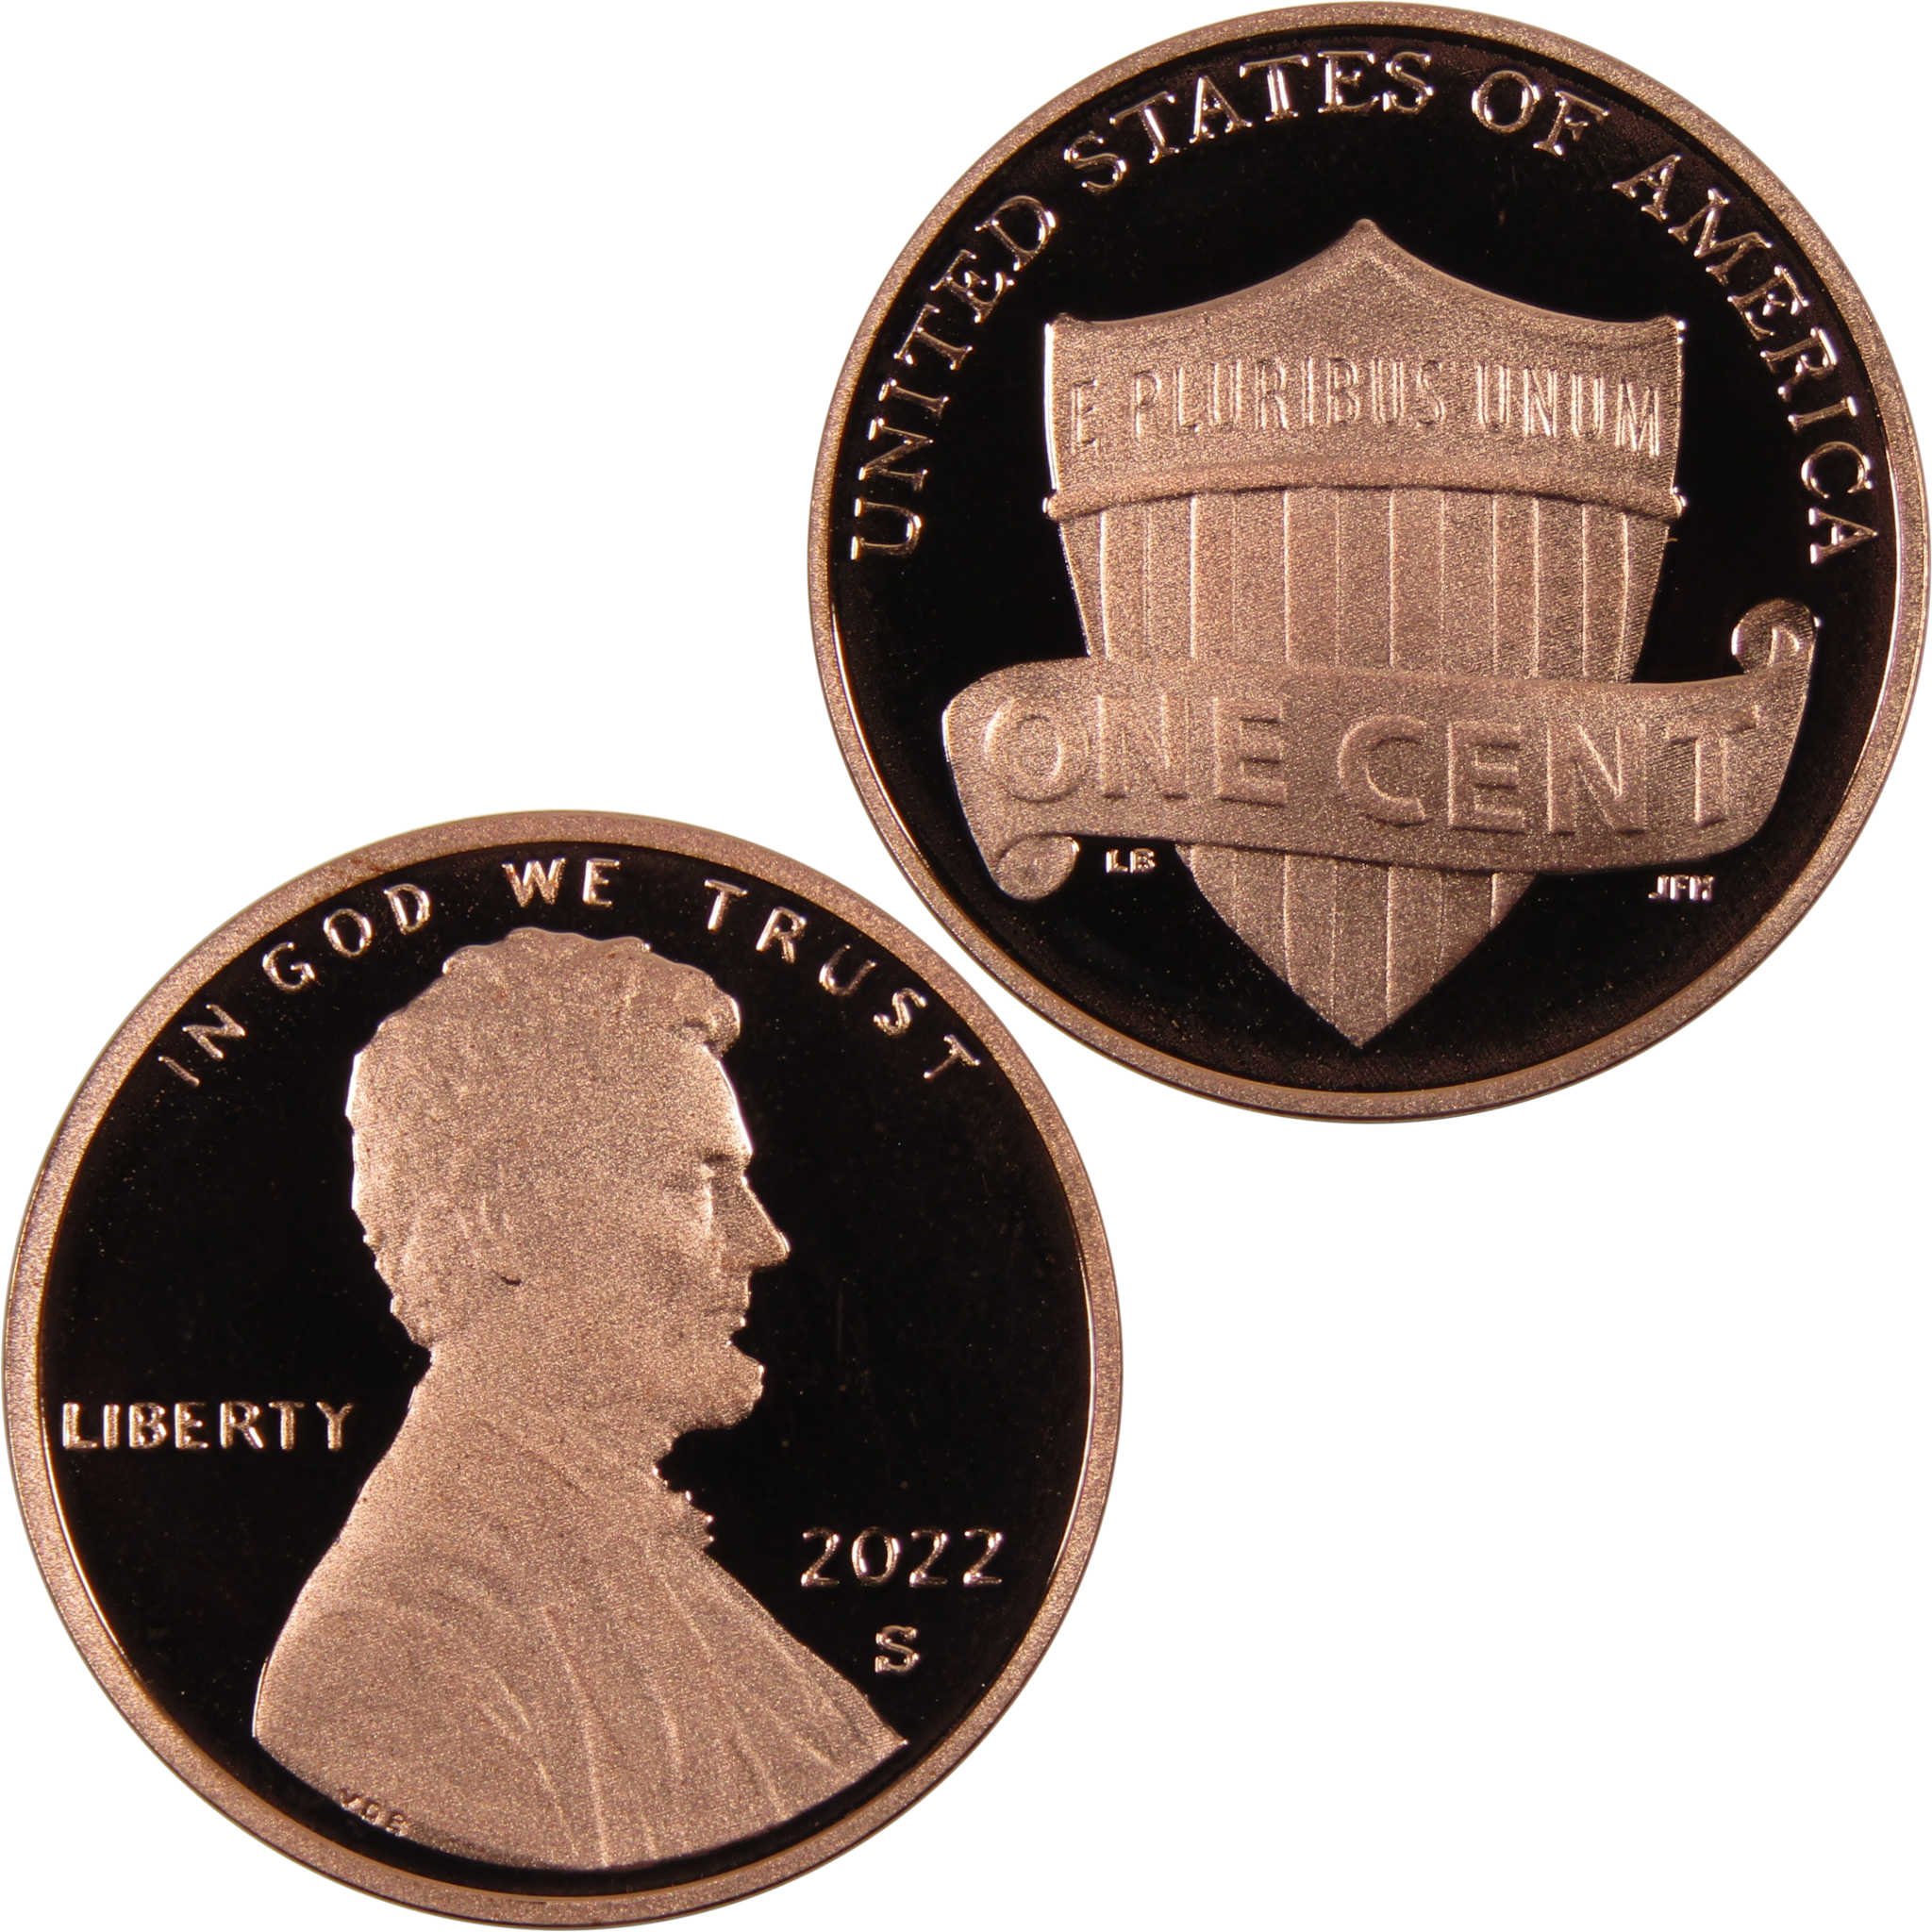 2022 S Lincoln Shield Cent Penny 1c Proof Coin